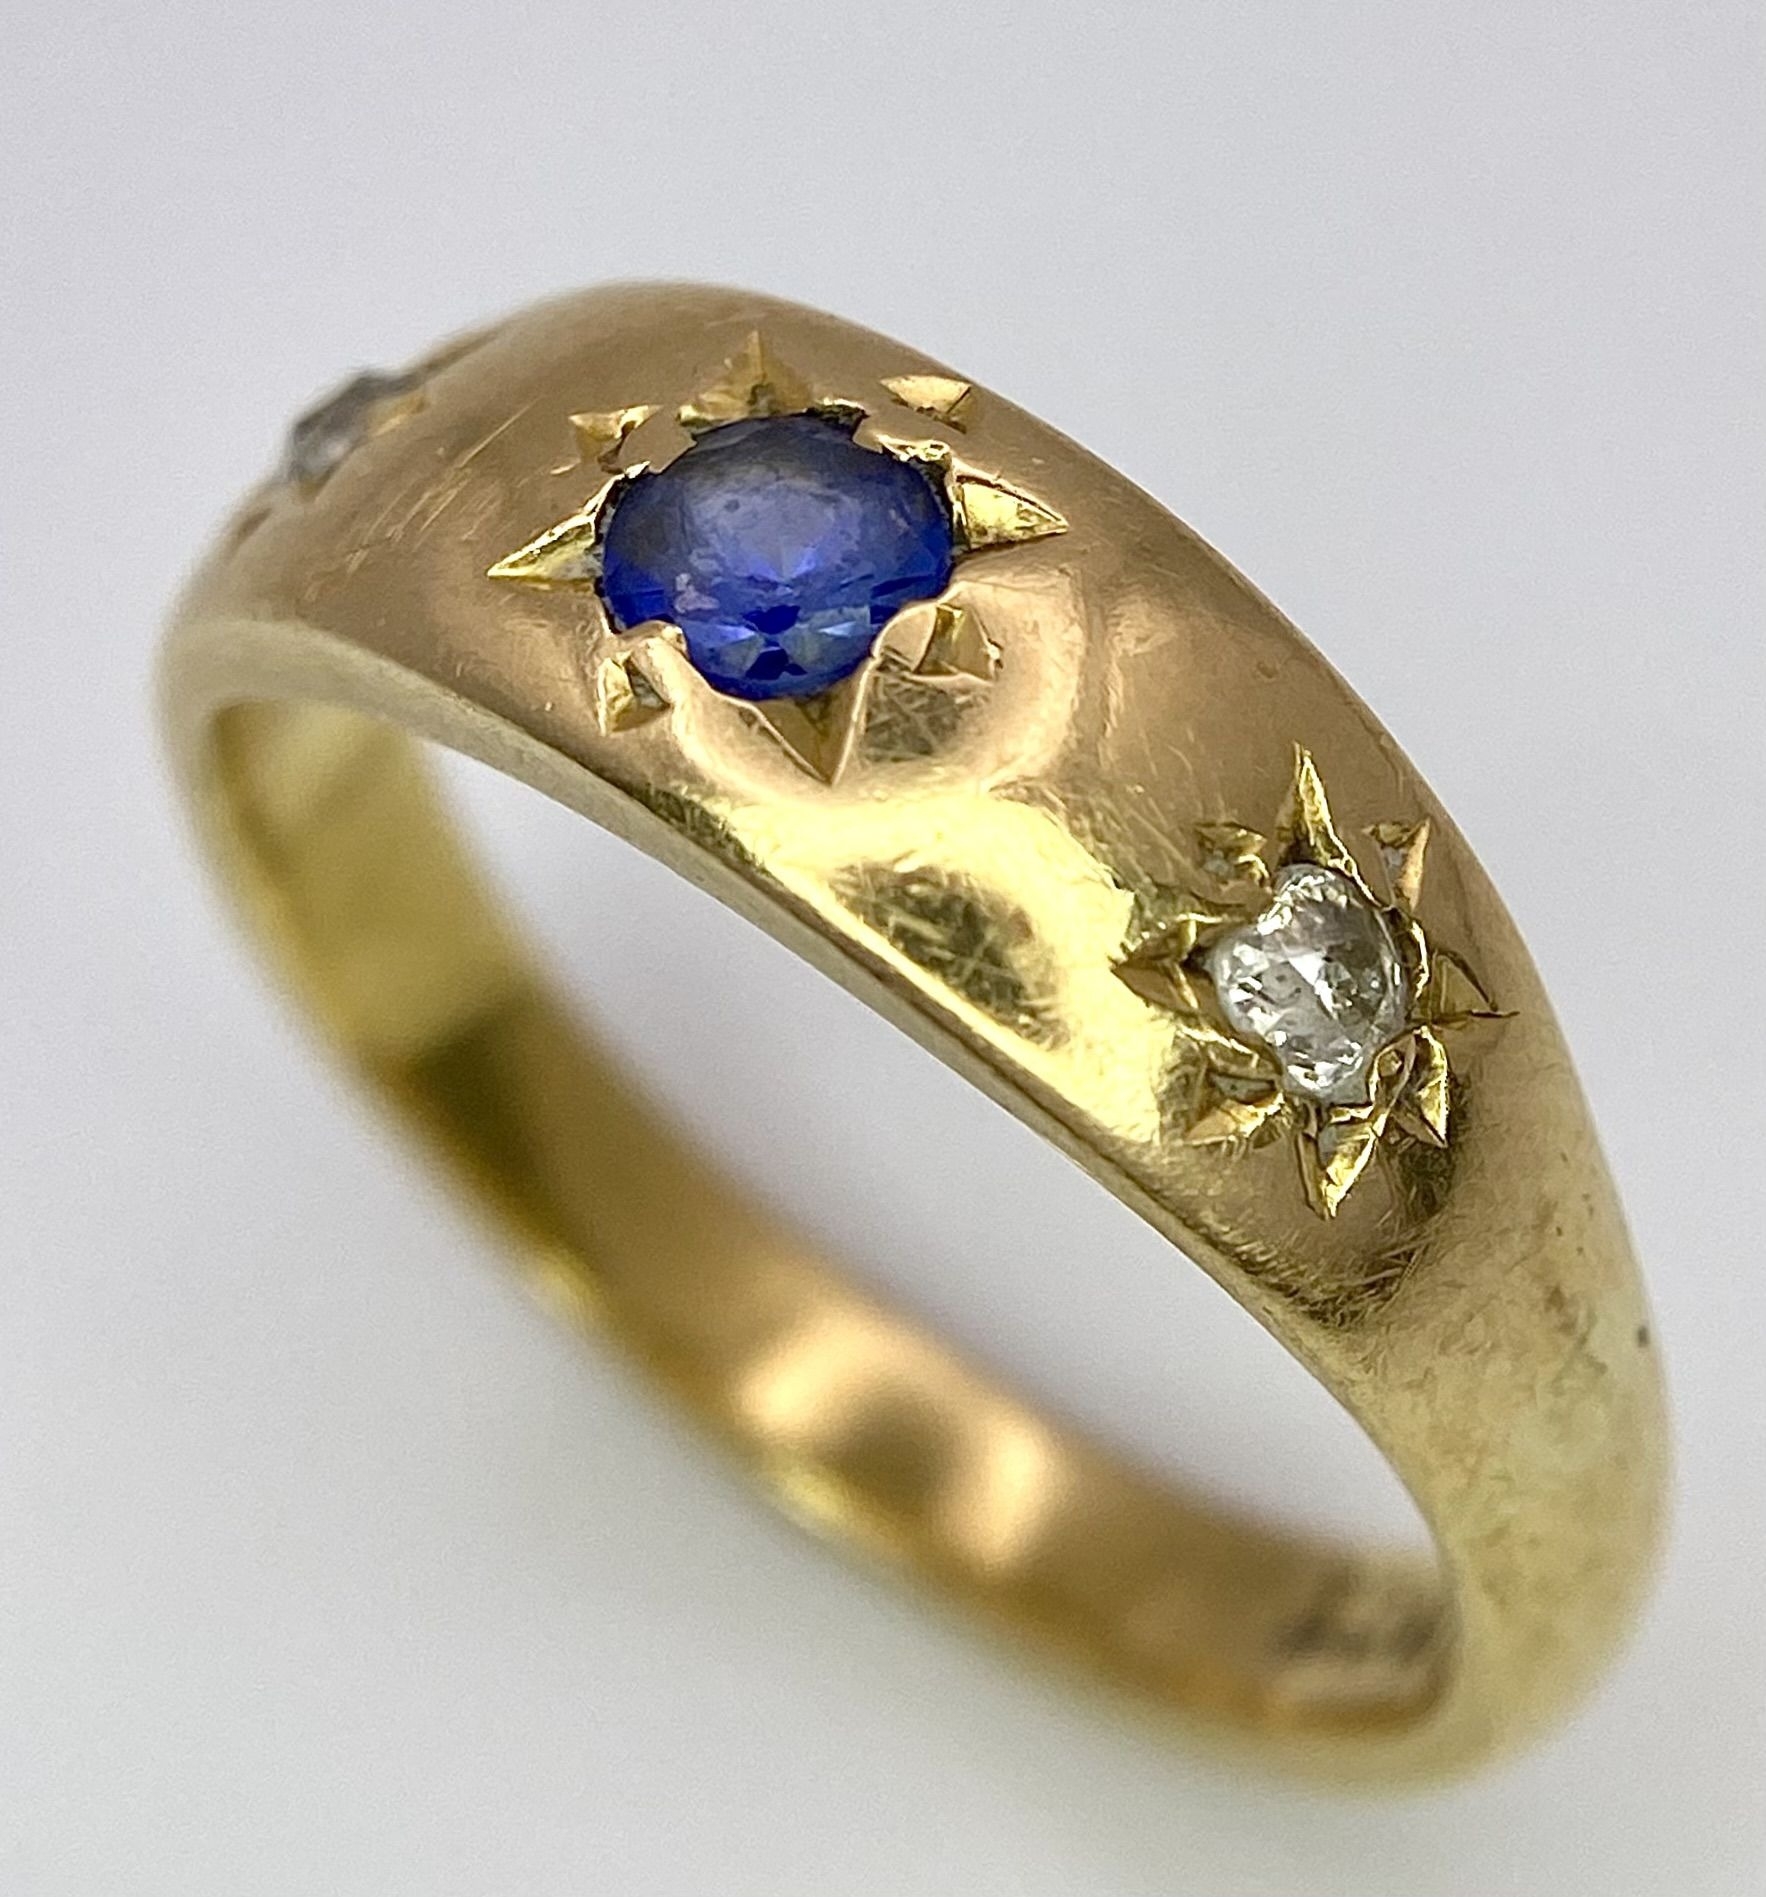 A Vintage 18K Yellow Gold Diamond and Sapphire Gypsy Ring. Size L. 4.6g total weight. - Image 4 of 6